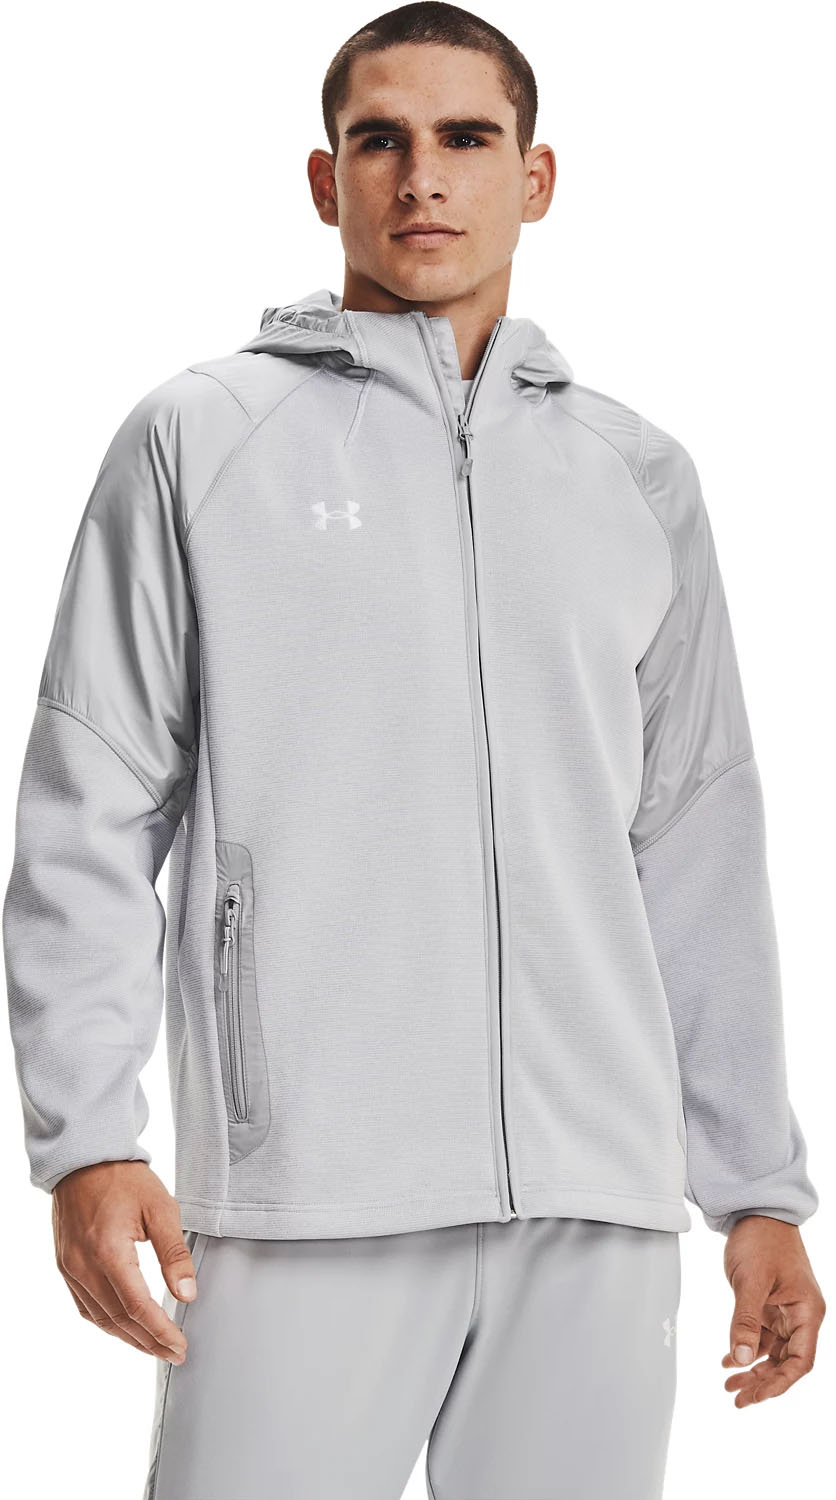 Under Armour - Mens M'S Team Swacket Warmup Top